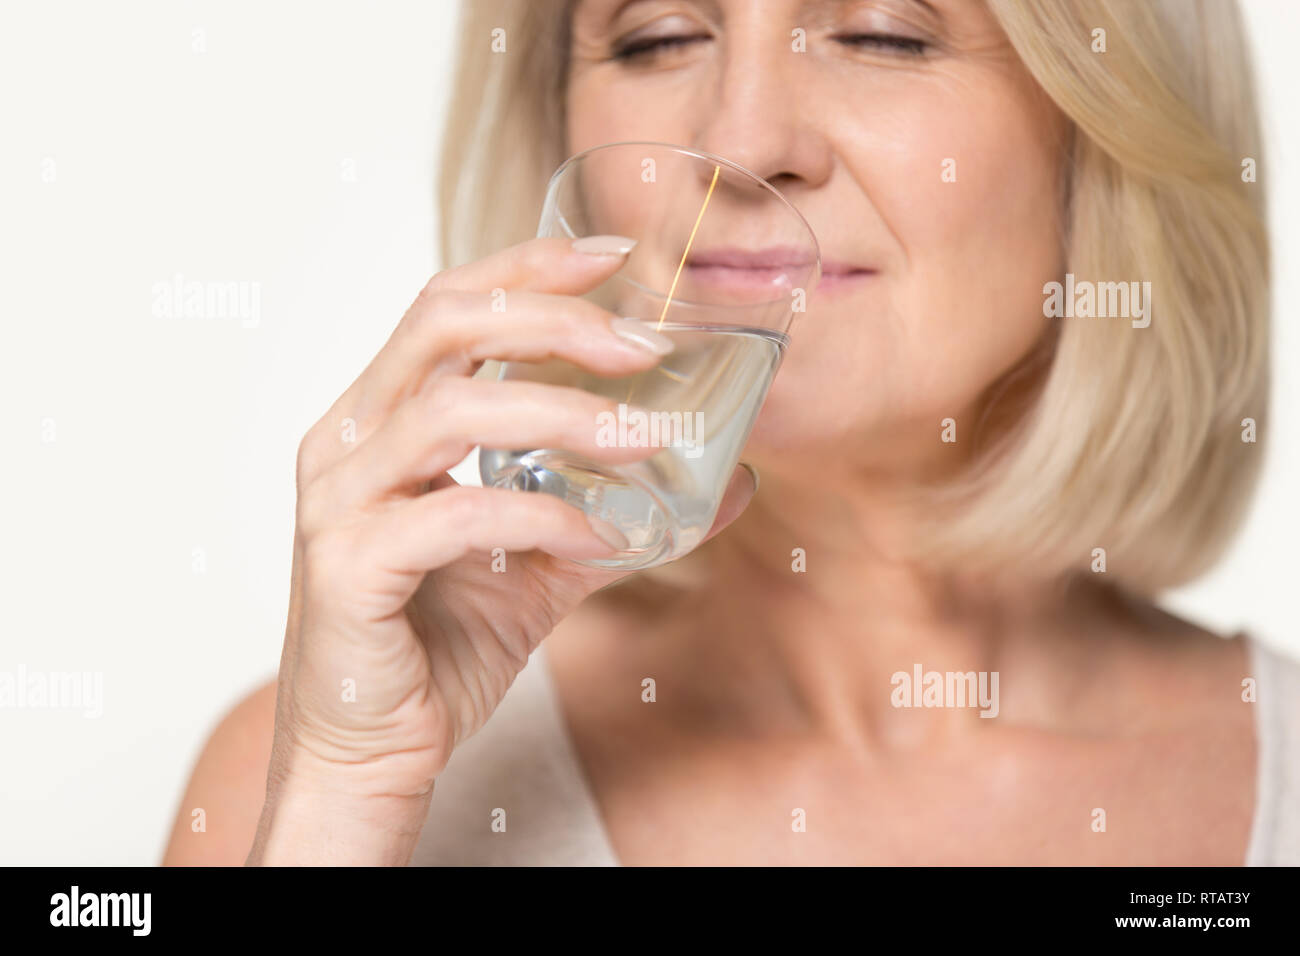 Dehydrated Skin High Resolution Stock Photography and Images - Alamy